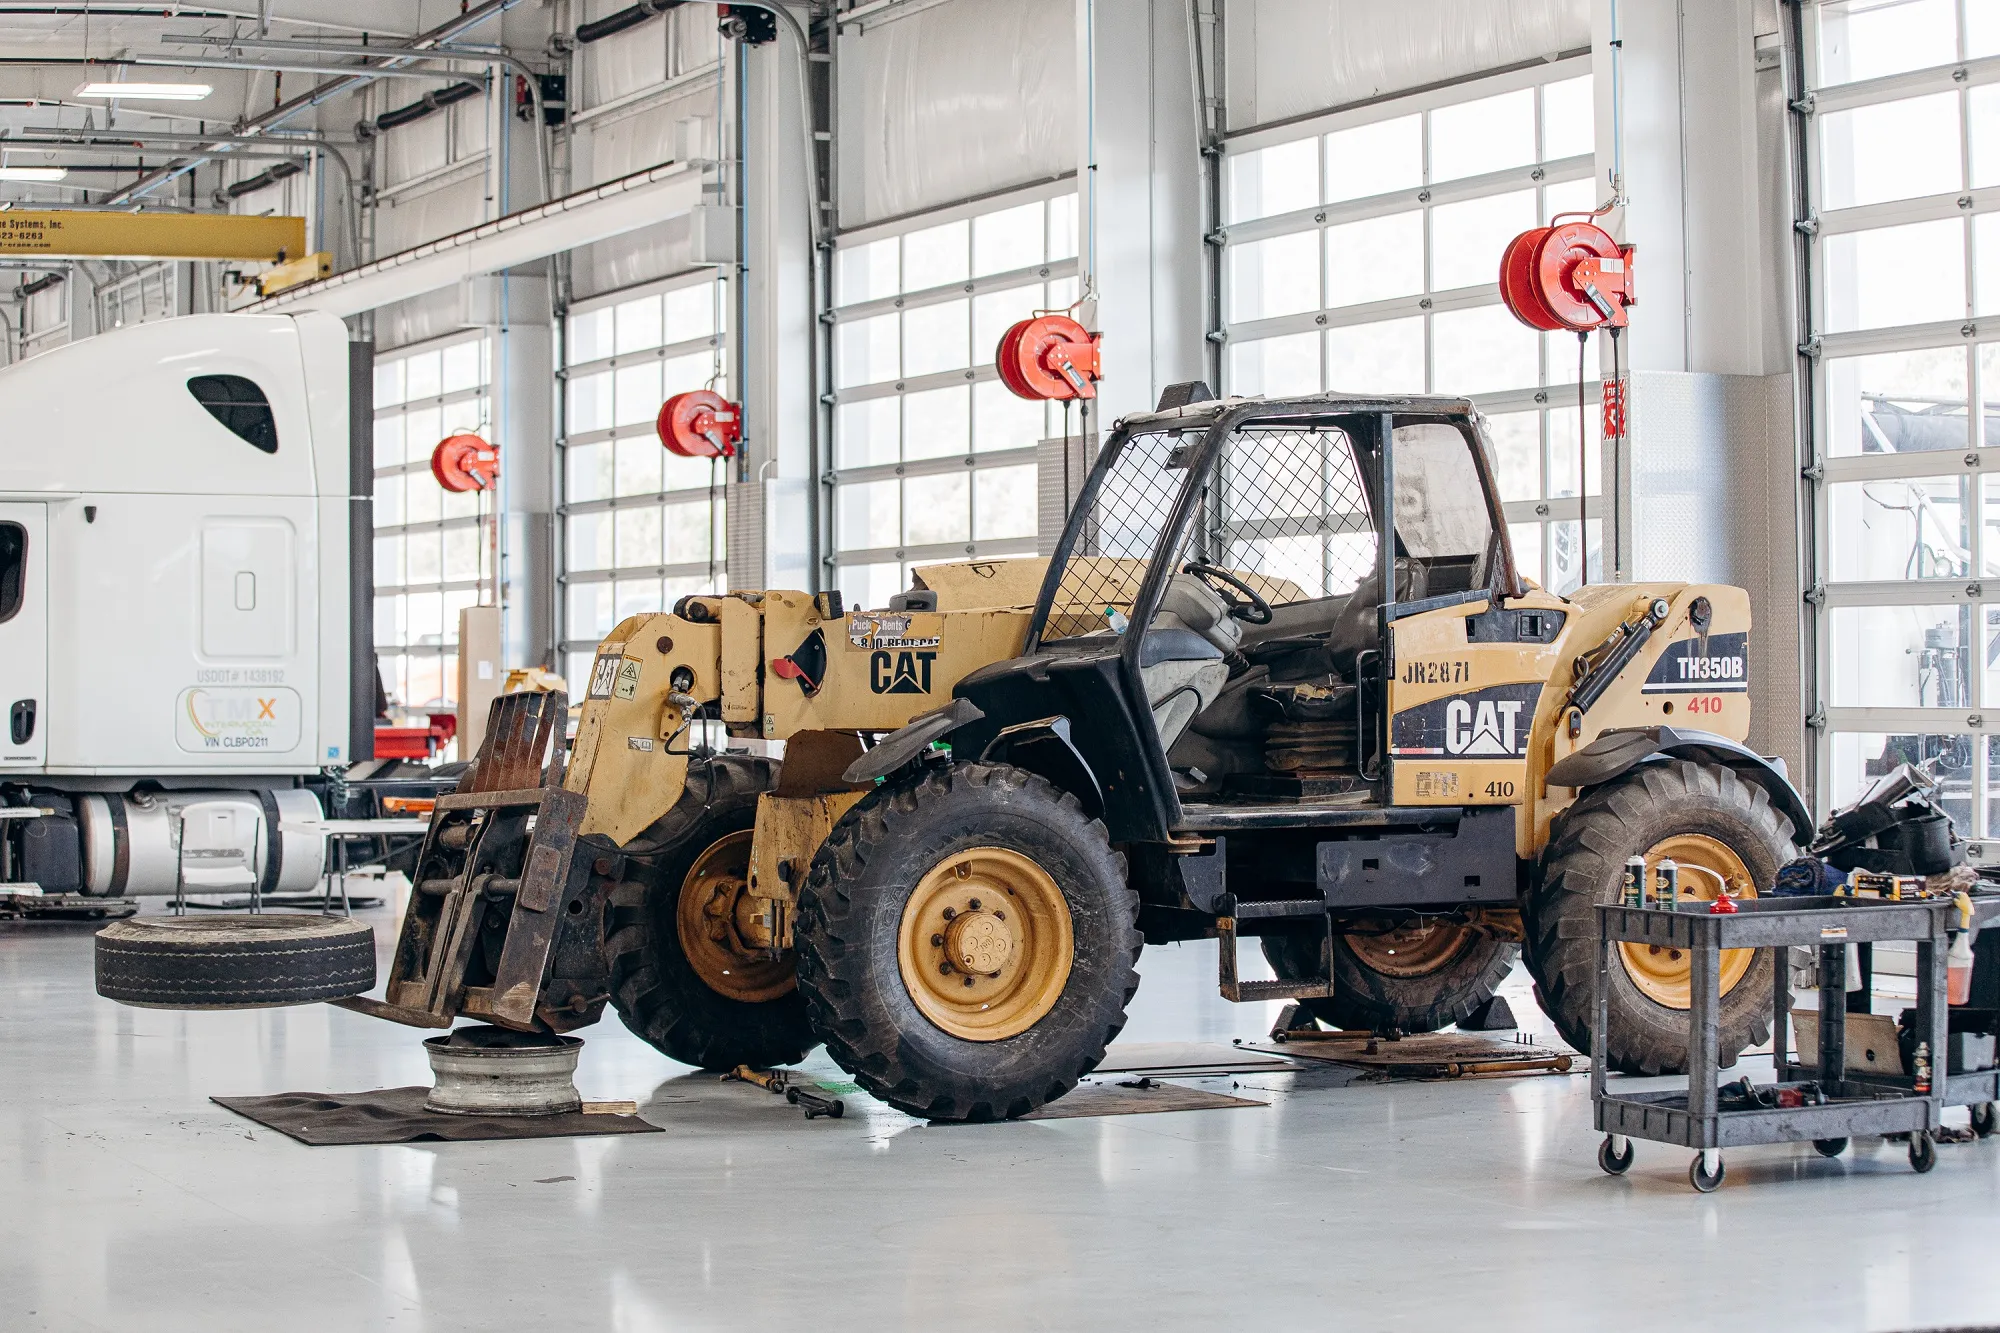 Forklift Repair Shop: Heavy Equipment Service at Asheville, NC